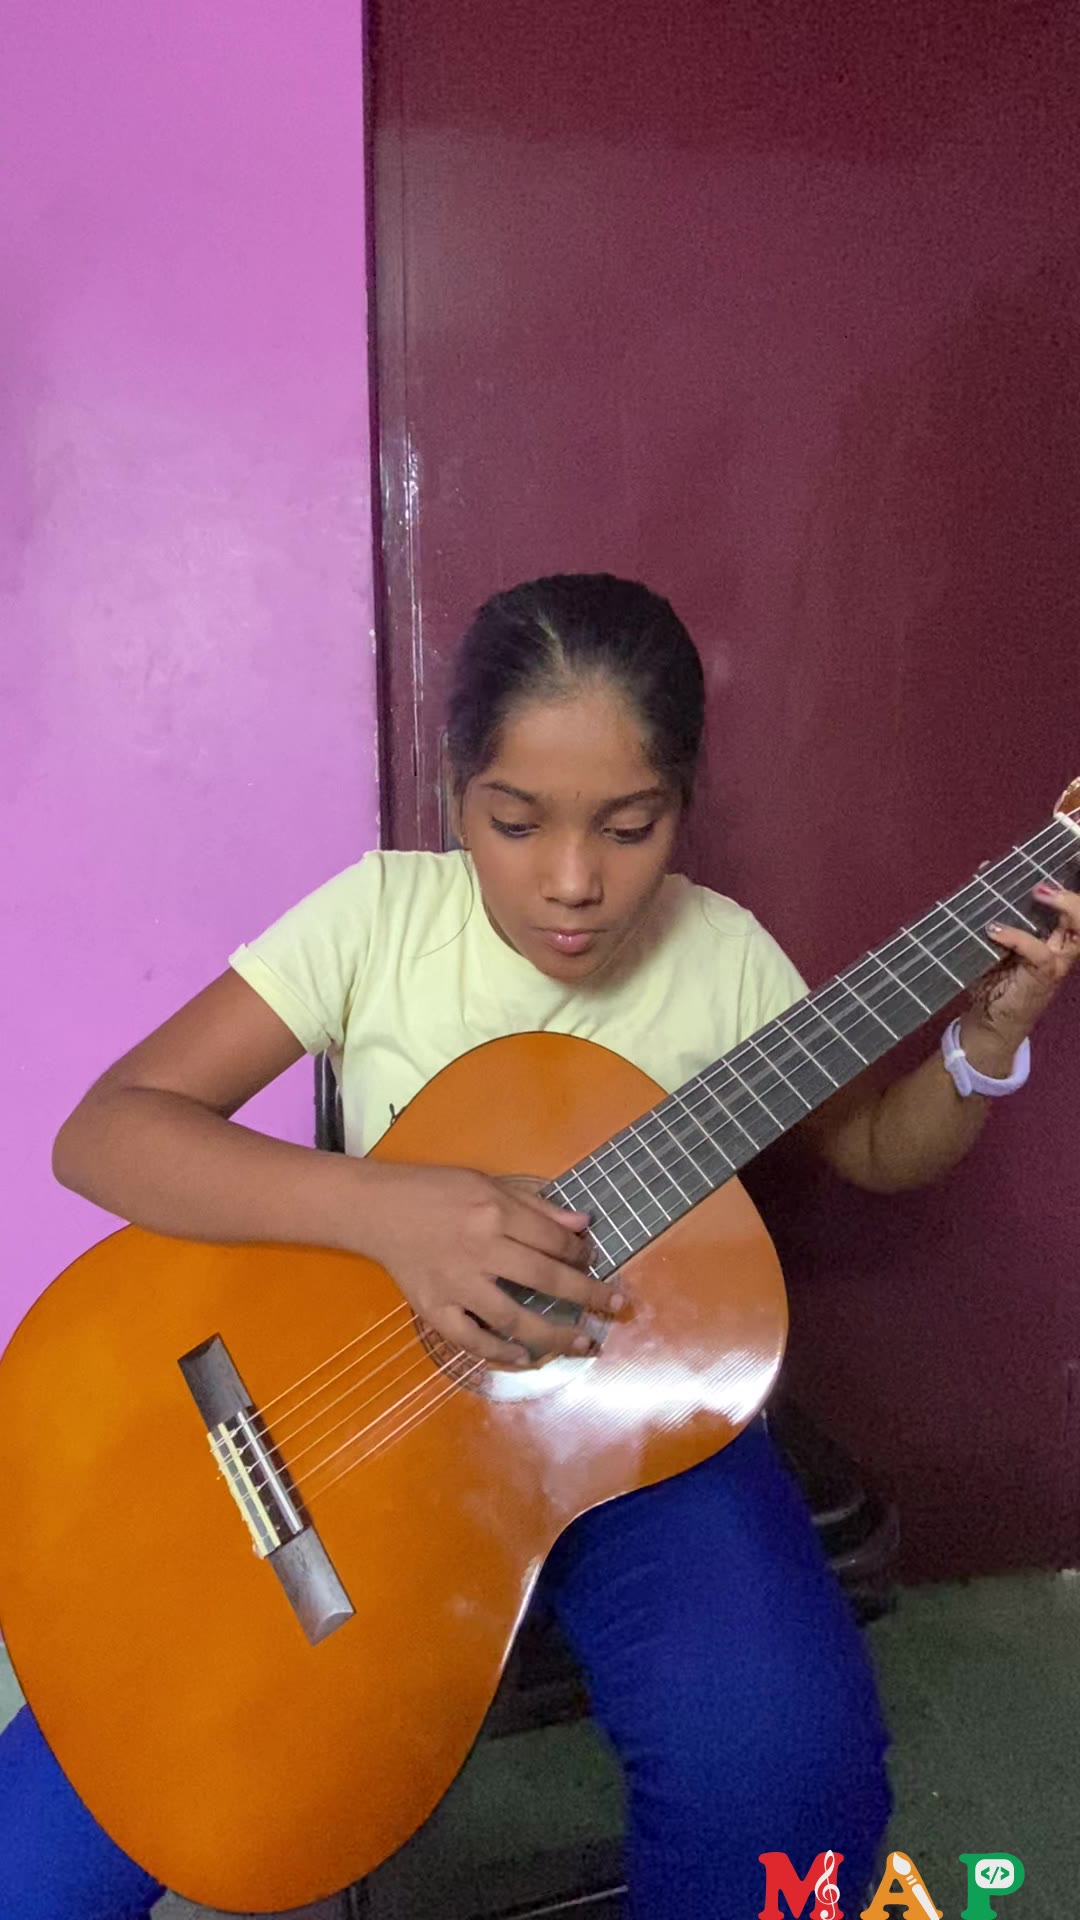 Student plays guitar for an online lesson